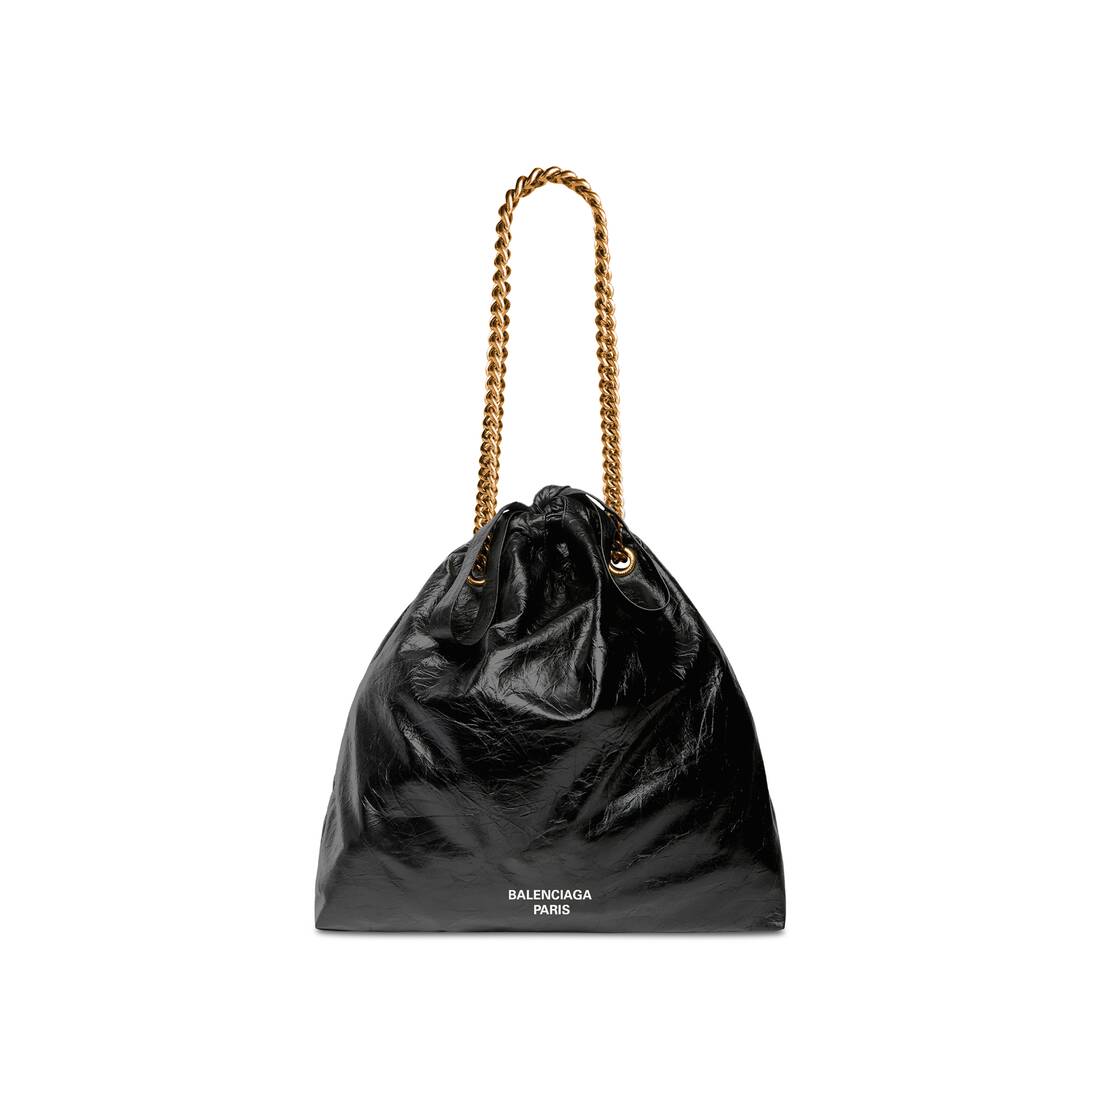 Balenciaga roasted for $4,200 tote bag with built-in glove